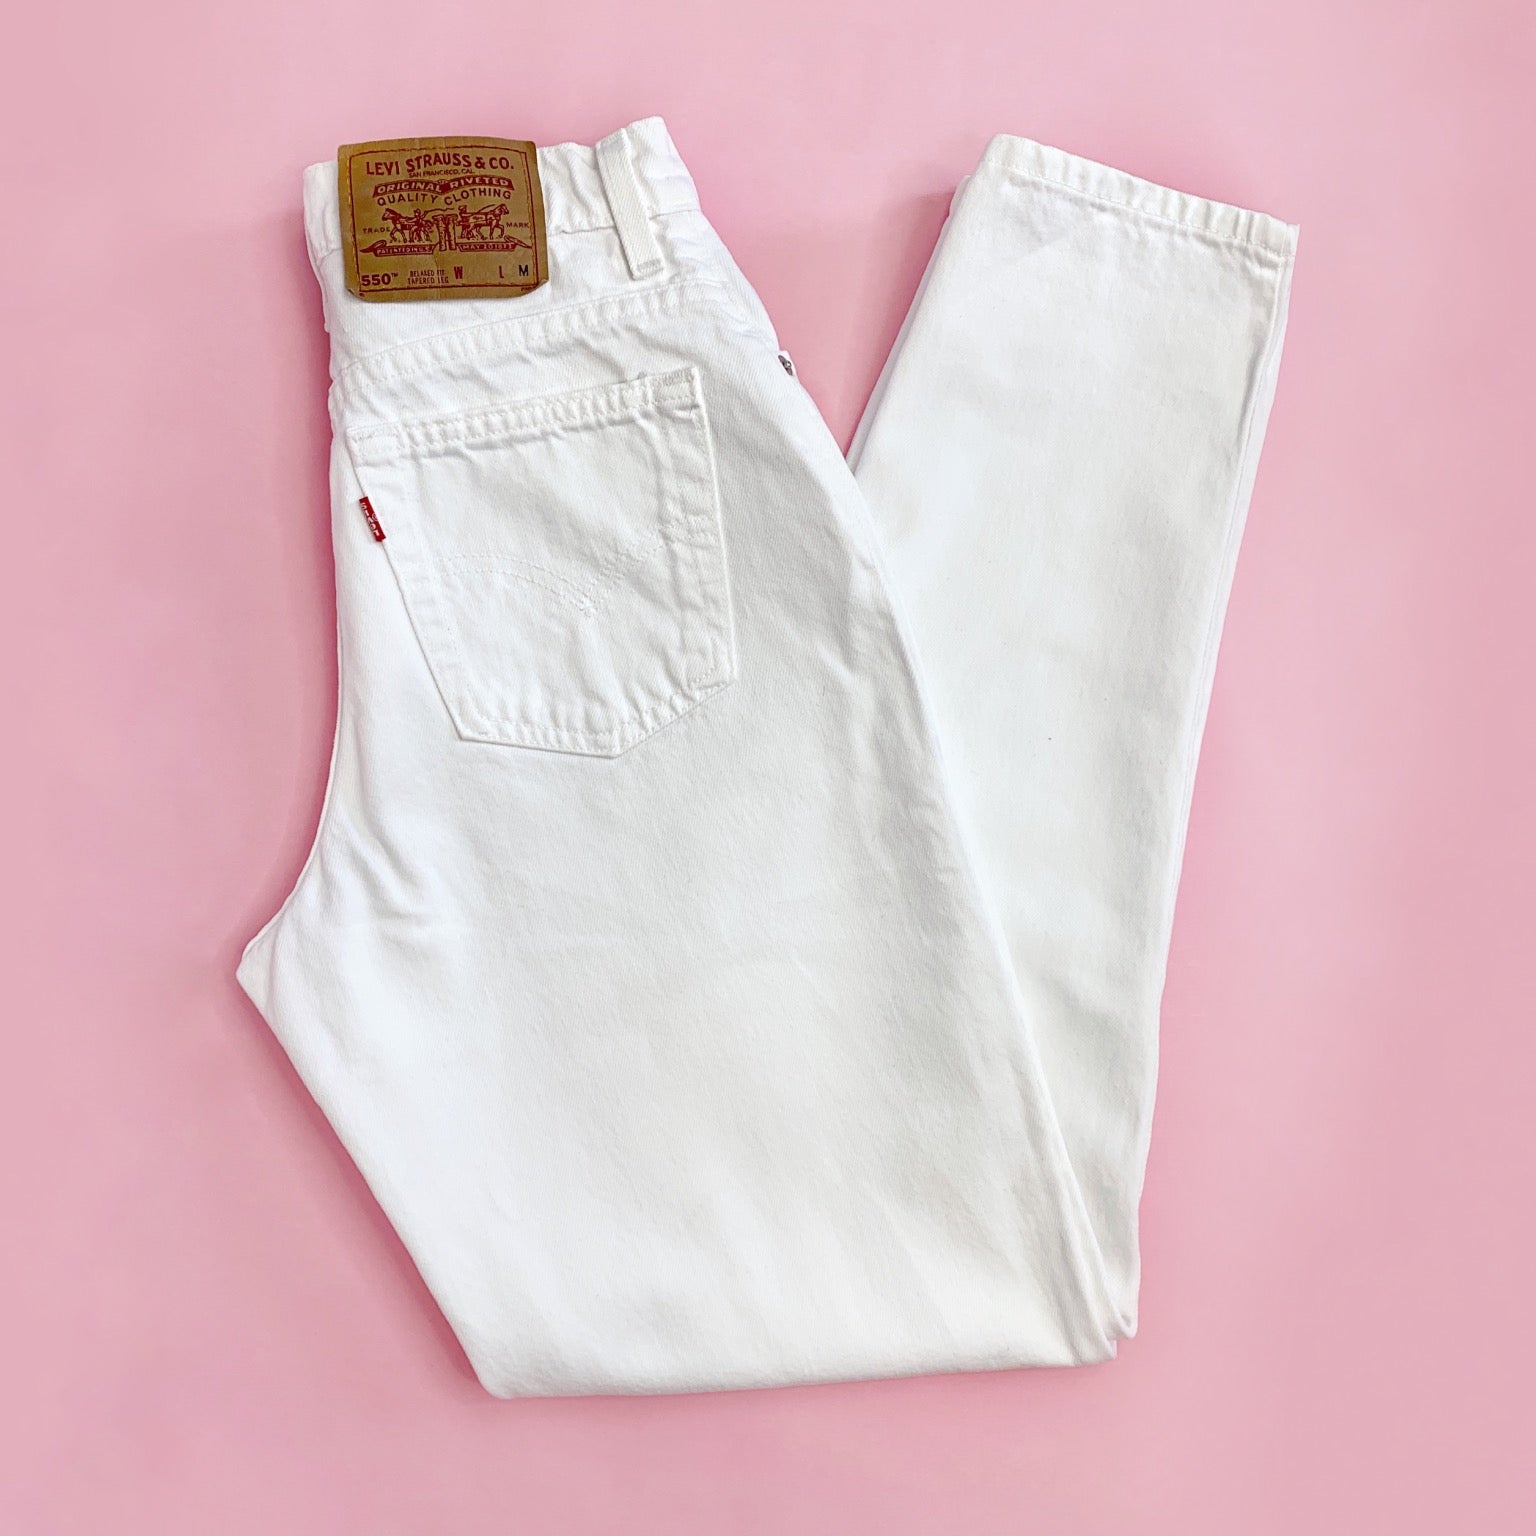 All Sizes White Vintage High Waisted Tapered Levis Jeans